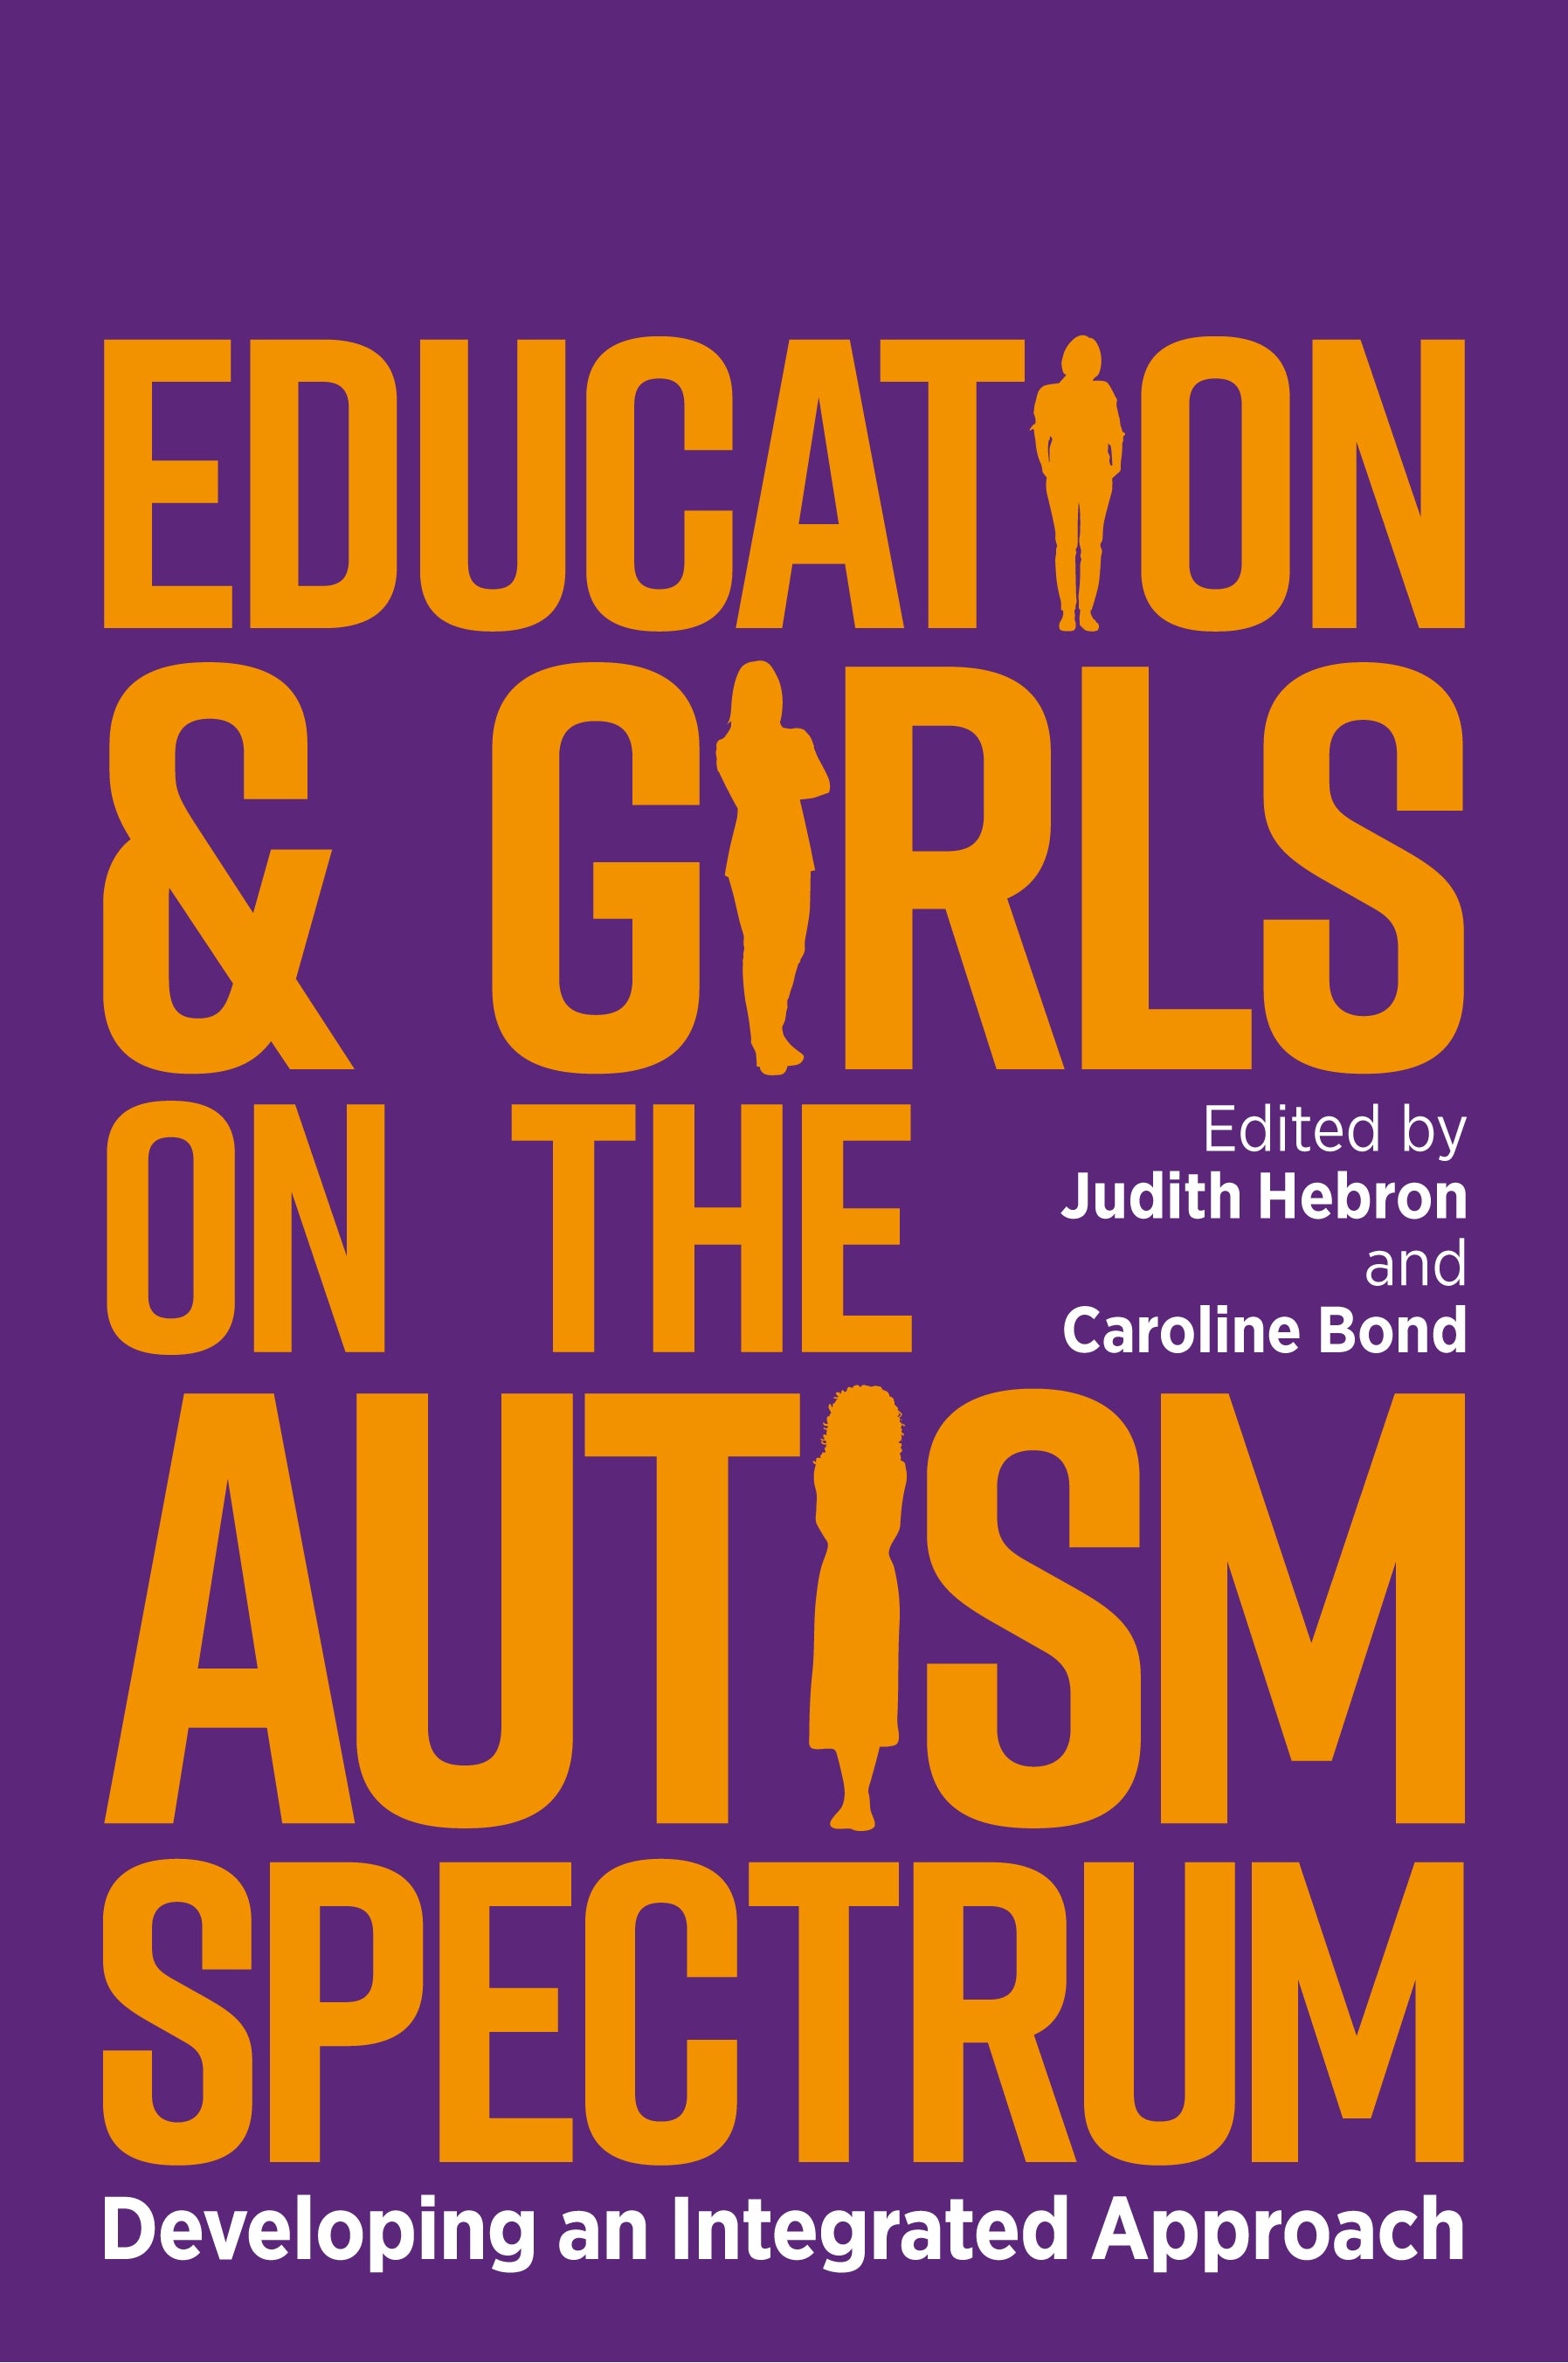 Education and Girls on the Autism Spectrum by Judith Hebron, Caroline Bond, No Author Listed